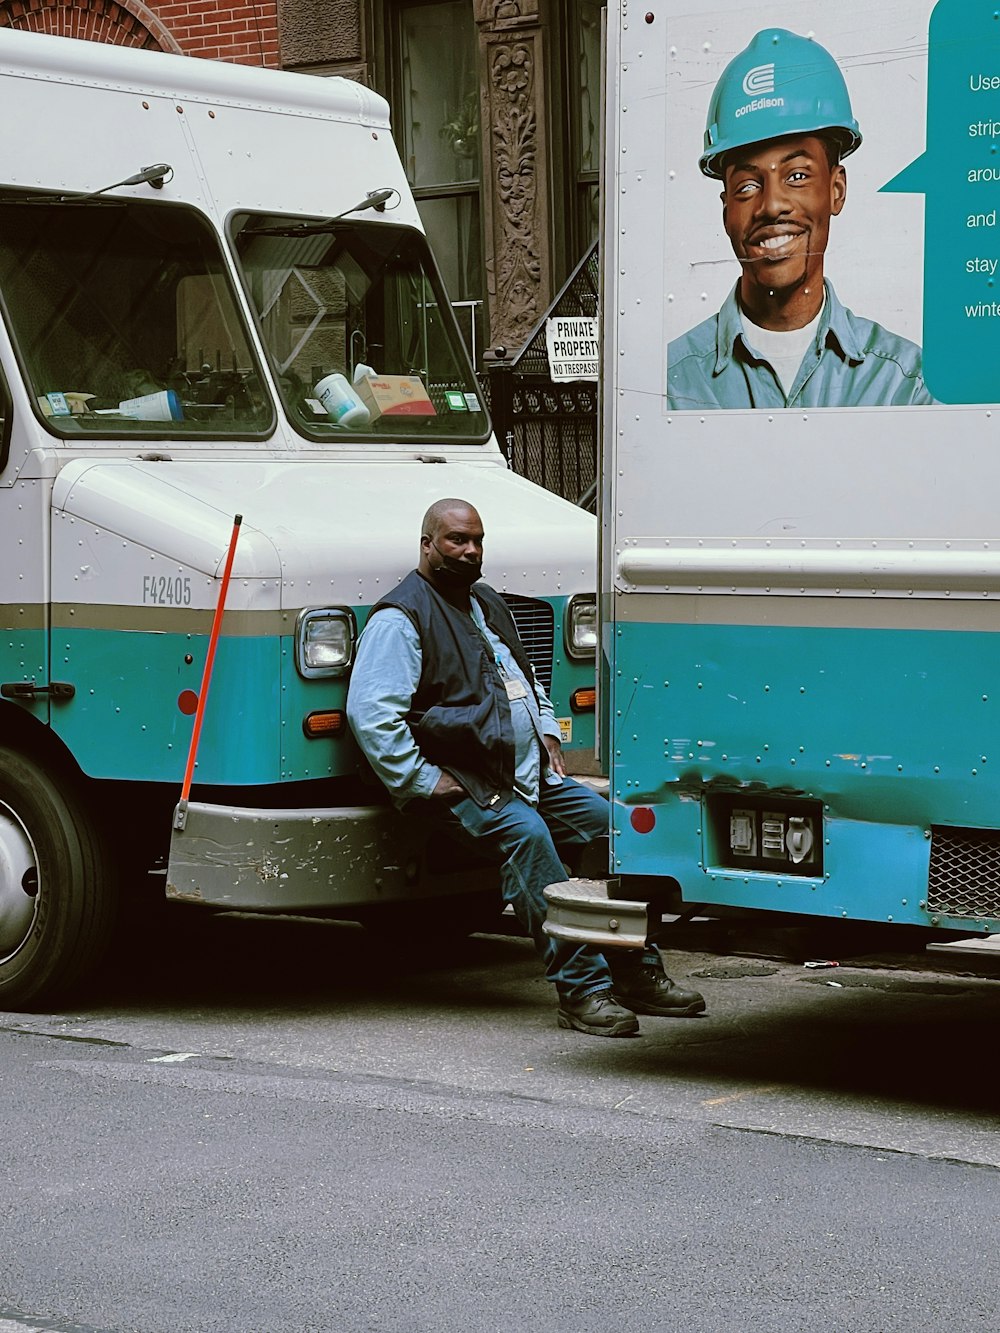 a man sitting on the side of a blue and white truck